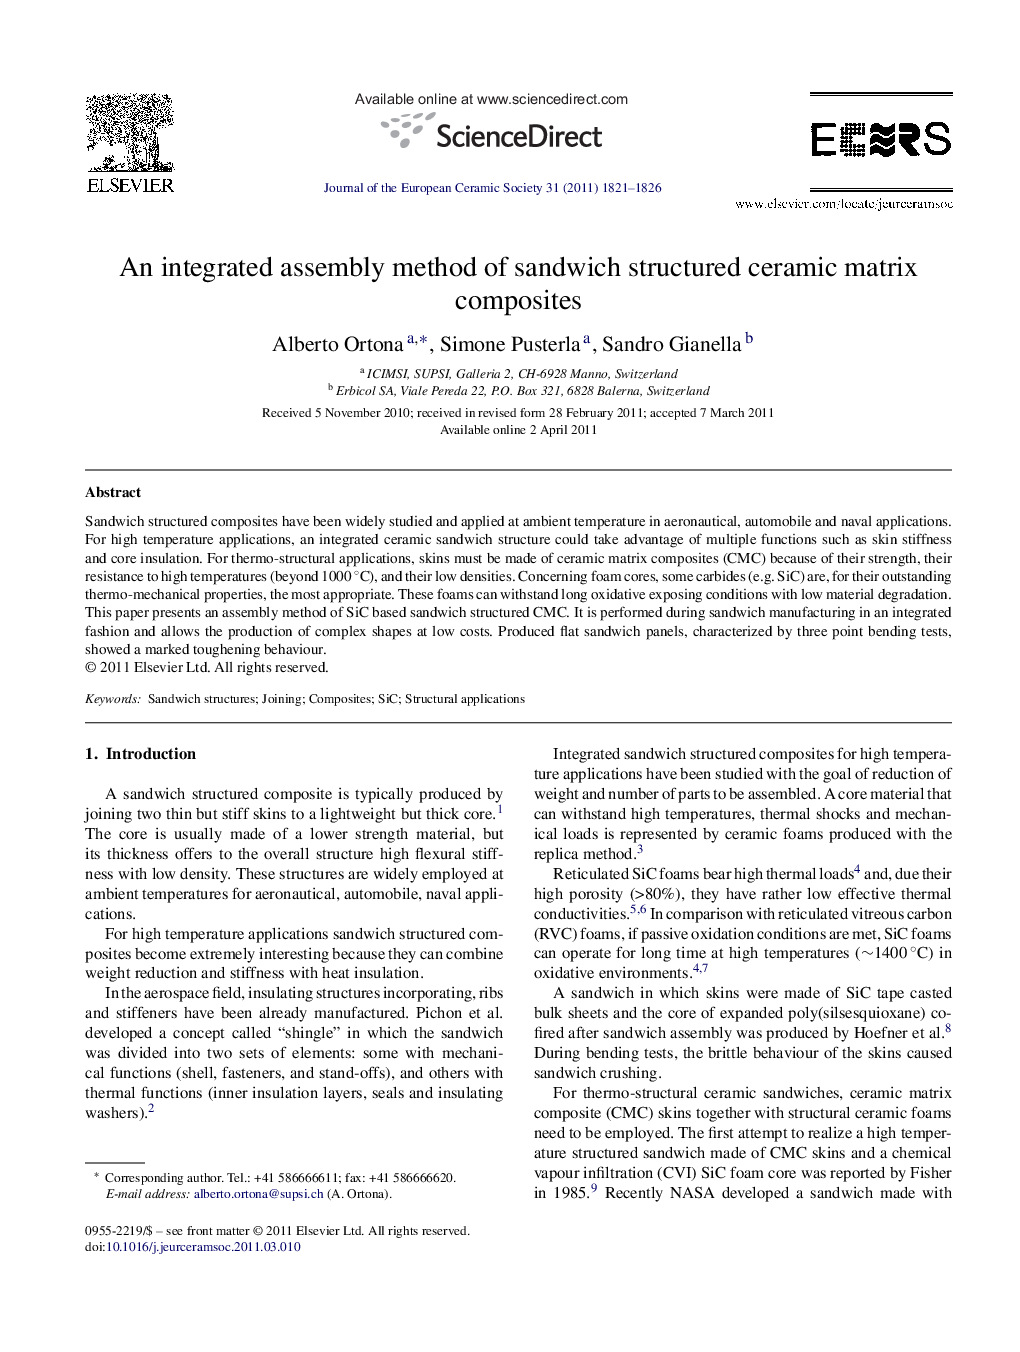 An integrated assembly method of sandwich structured ceramic matrix composites